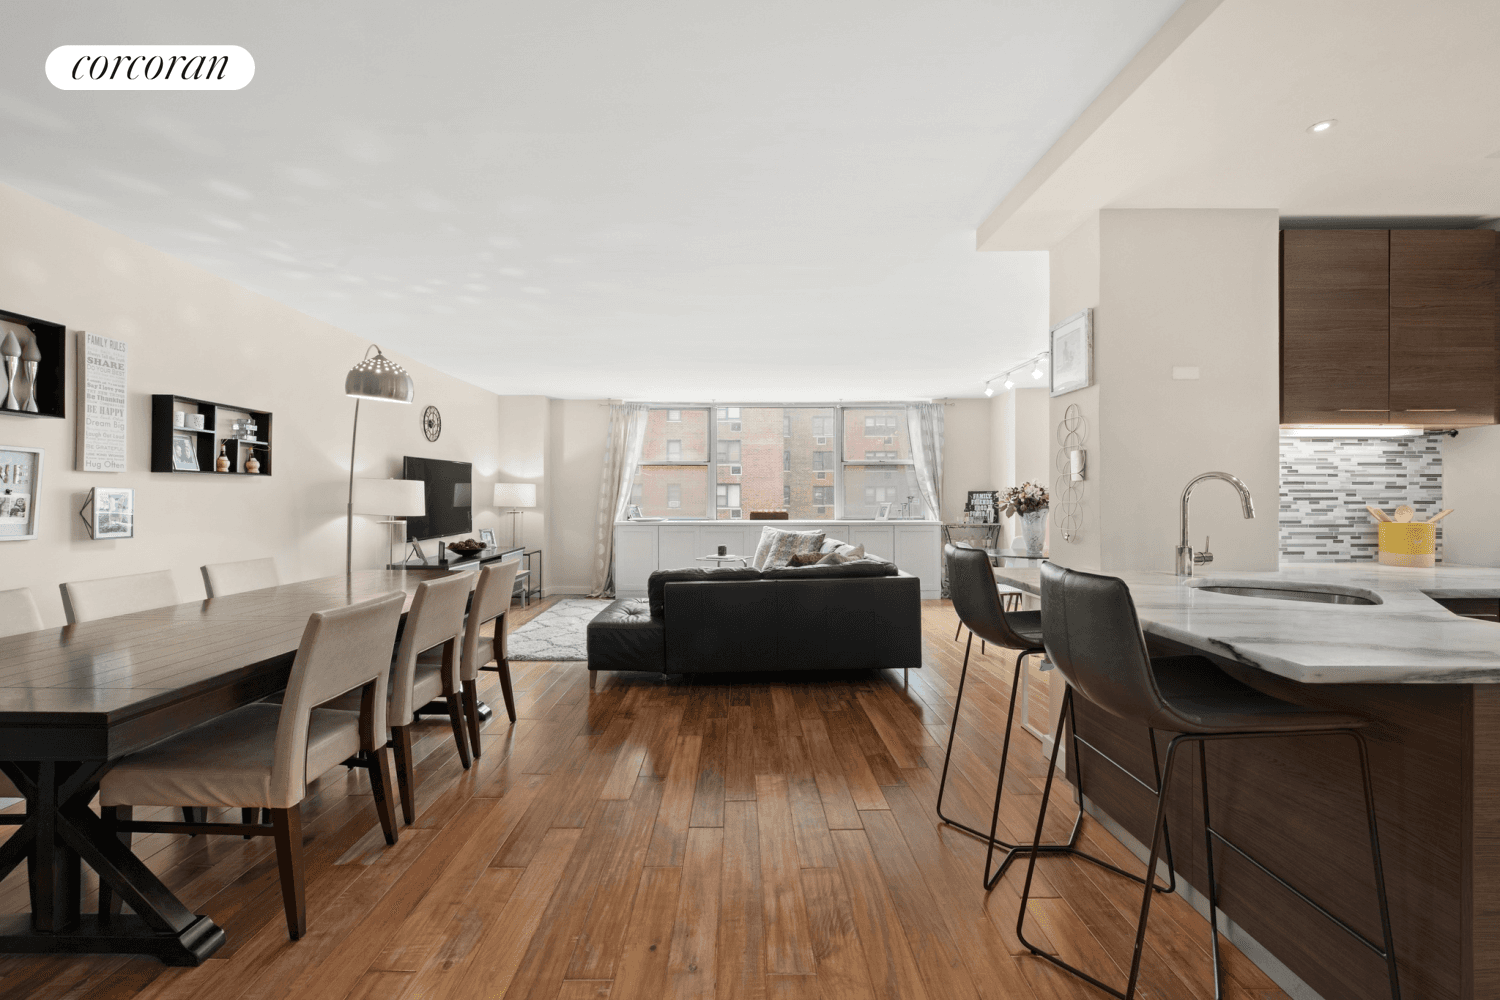 This sun drenched co op, expertly reimagined by an architect to maximize space and style, offers a rare chance to own a thoughtfully designed Upper East Side residence.